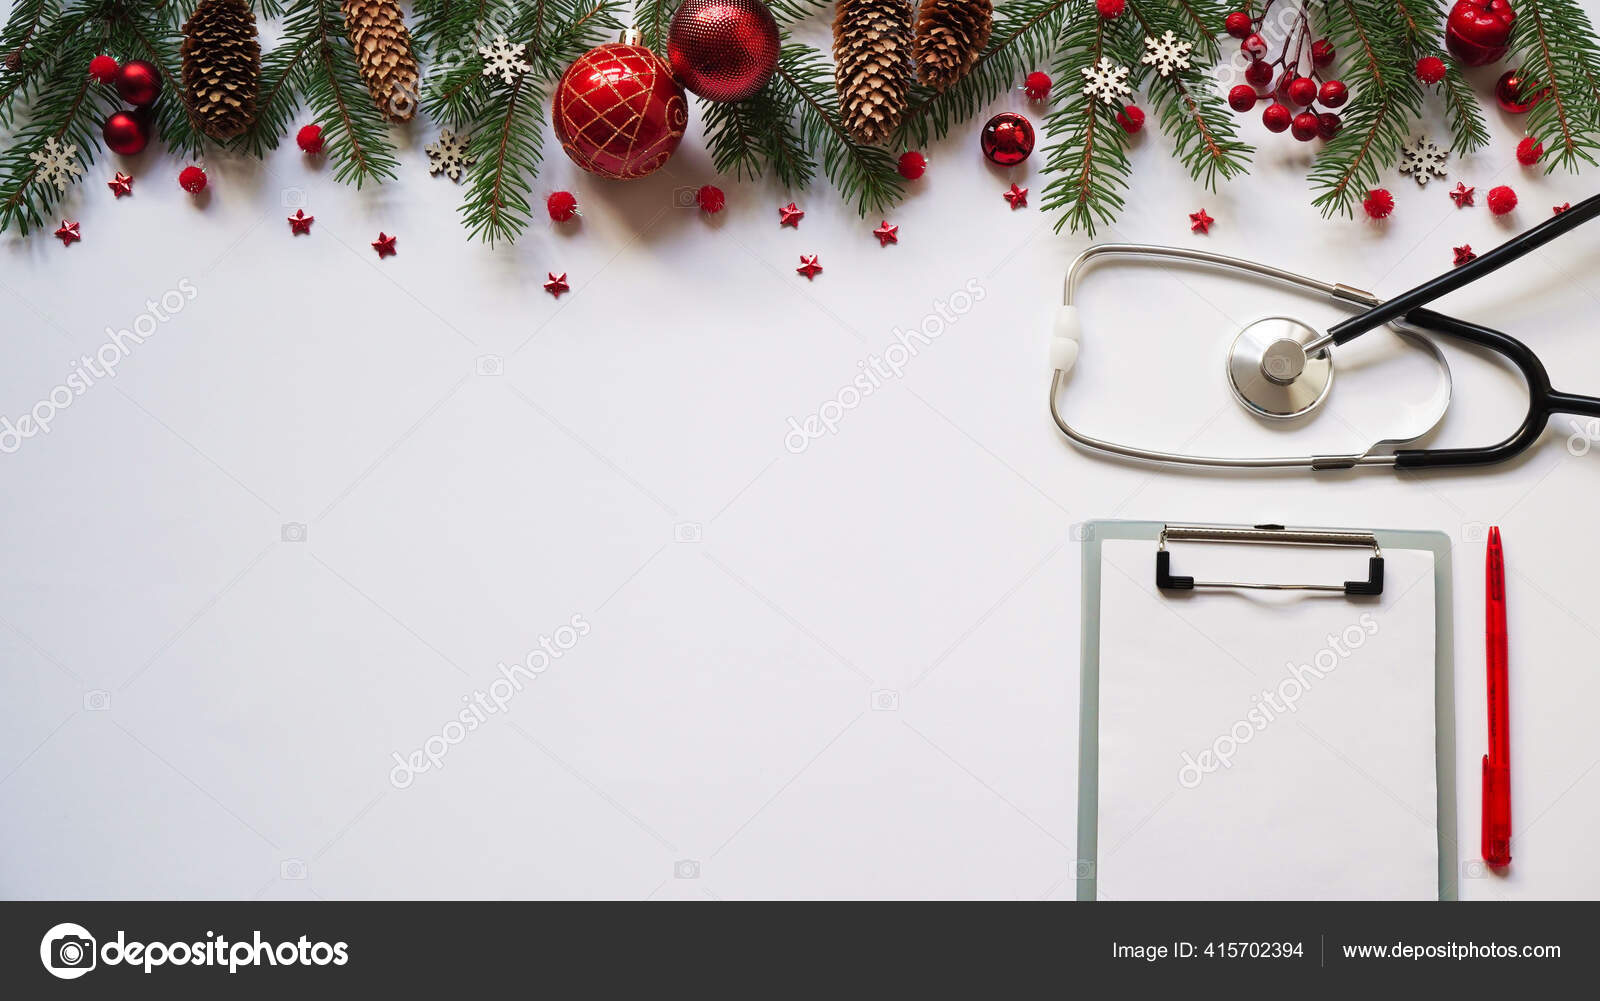 Christmas Medical Banner Fir Branches Cones Red Balls Snowflakes  Stethoscope Stock Photo by © 415702394